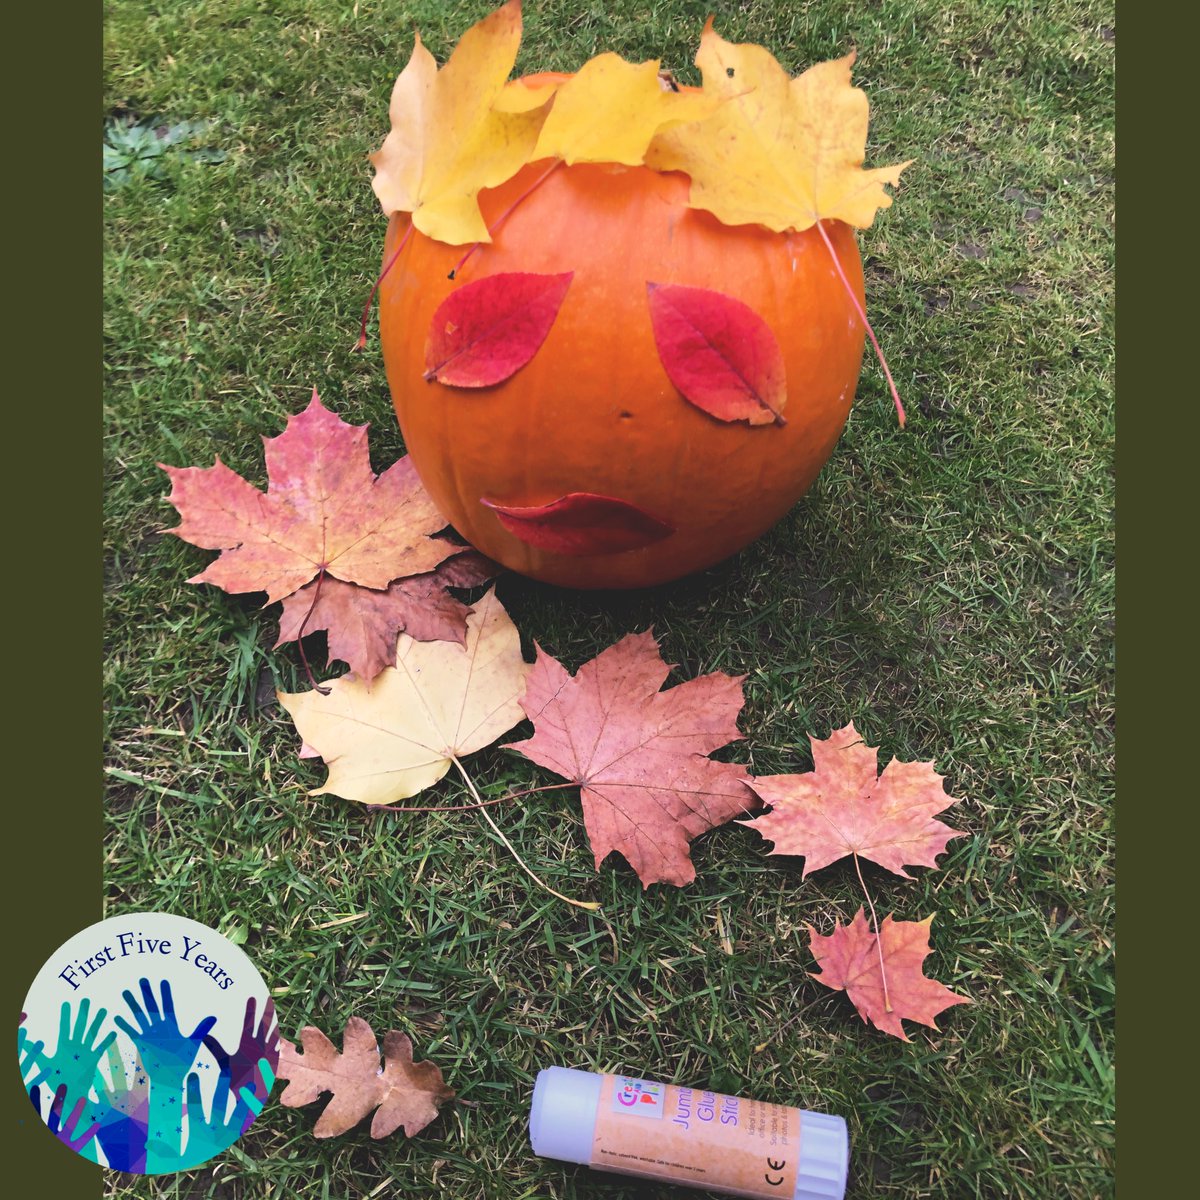 🎃 One Pumpkin - One Week - Day One 🎃

This week we’re showing you how to entertain the little ones for a whole week with a single pumpkin! #eytalking #learningthroughplay #activitiesathome #Halloween #pumpkinplay